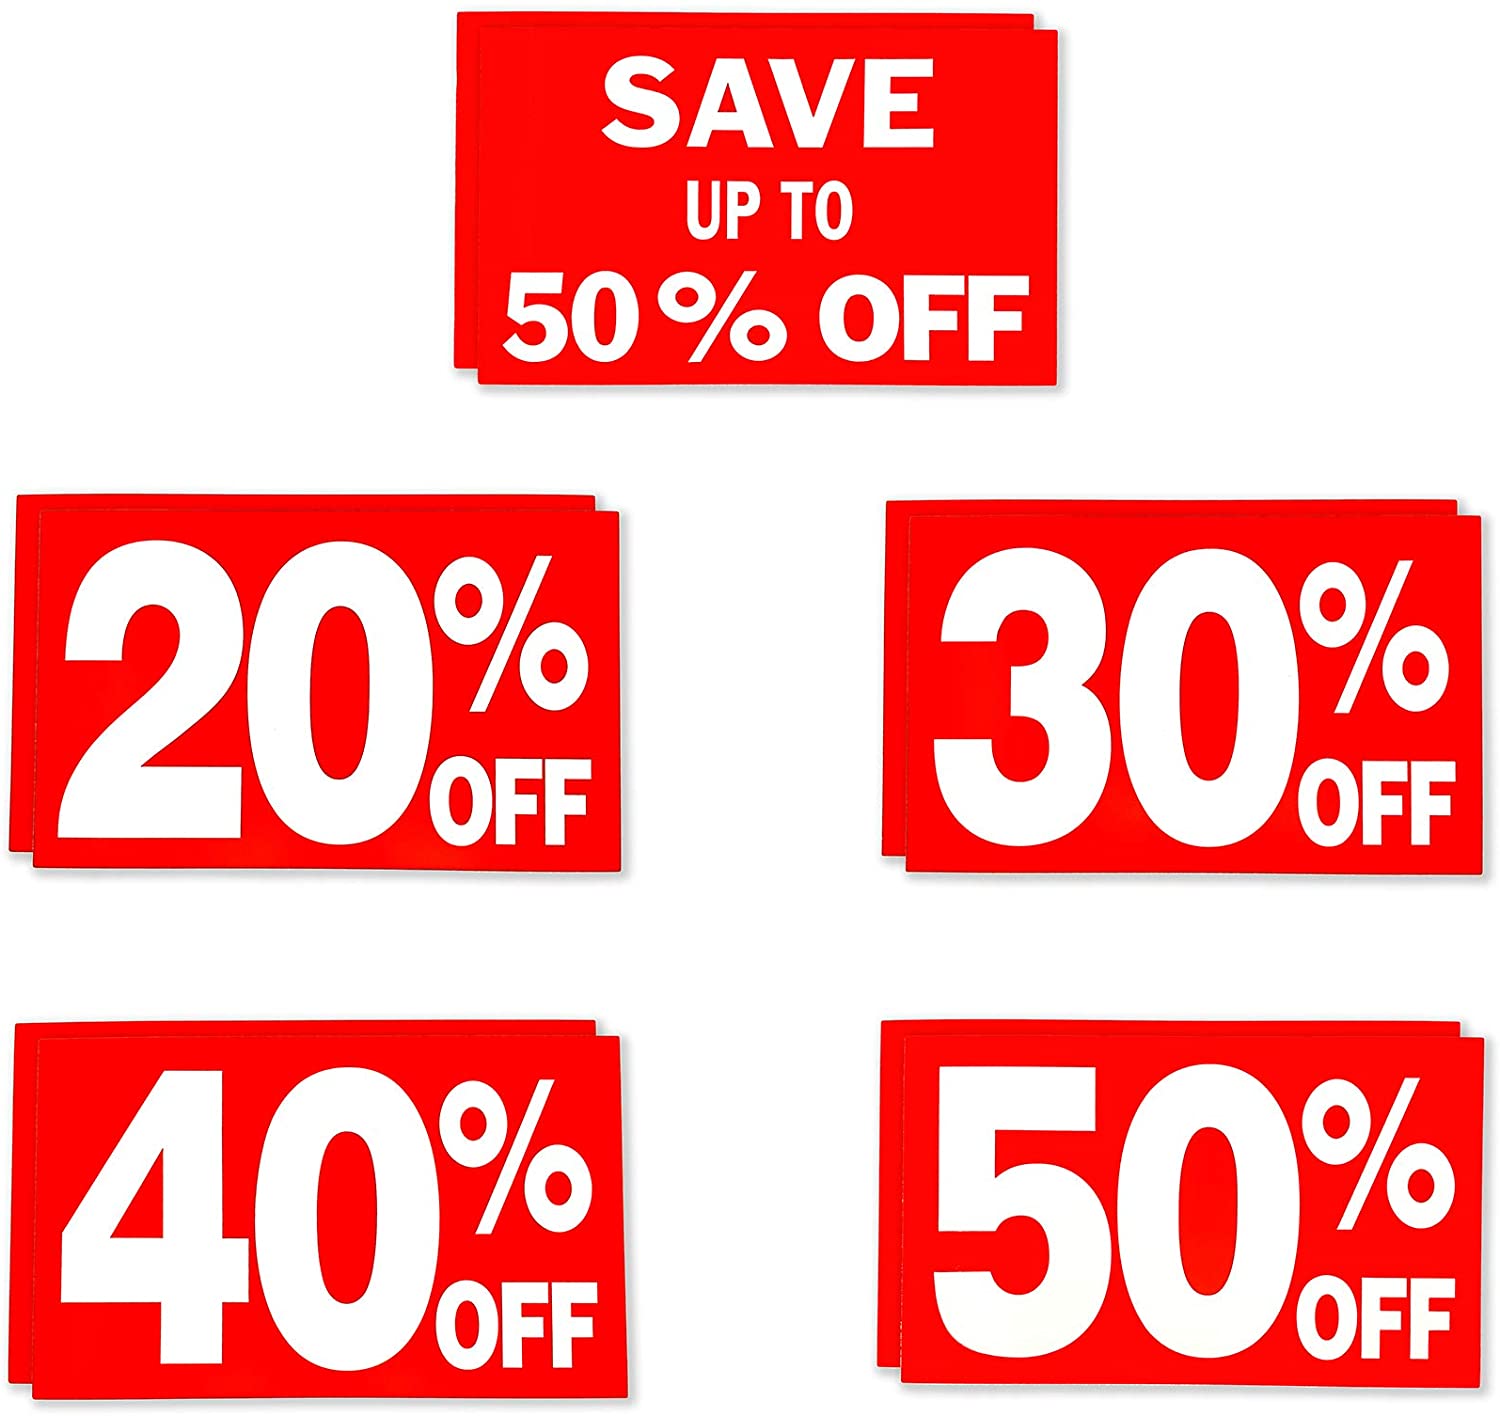 Save up to 50% Off Discount Sale Sign Bundle Pack, 7 x 11: 20%, 30%, 40%  & 50%, 10 Each, 50 Pack